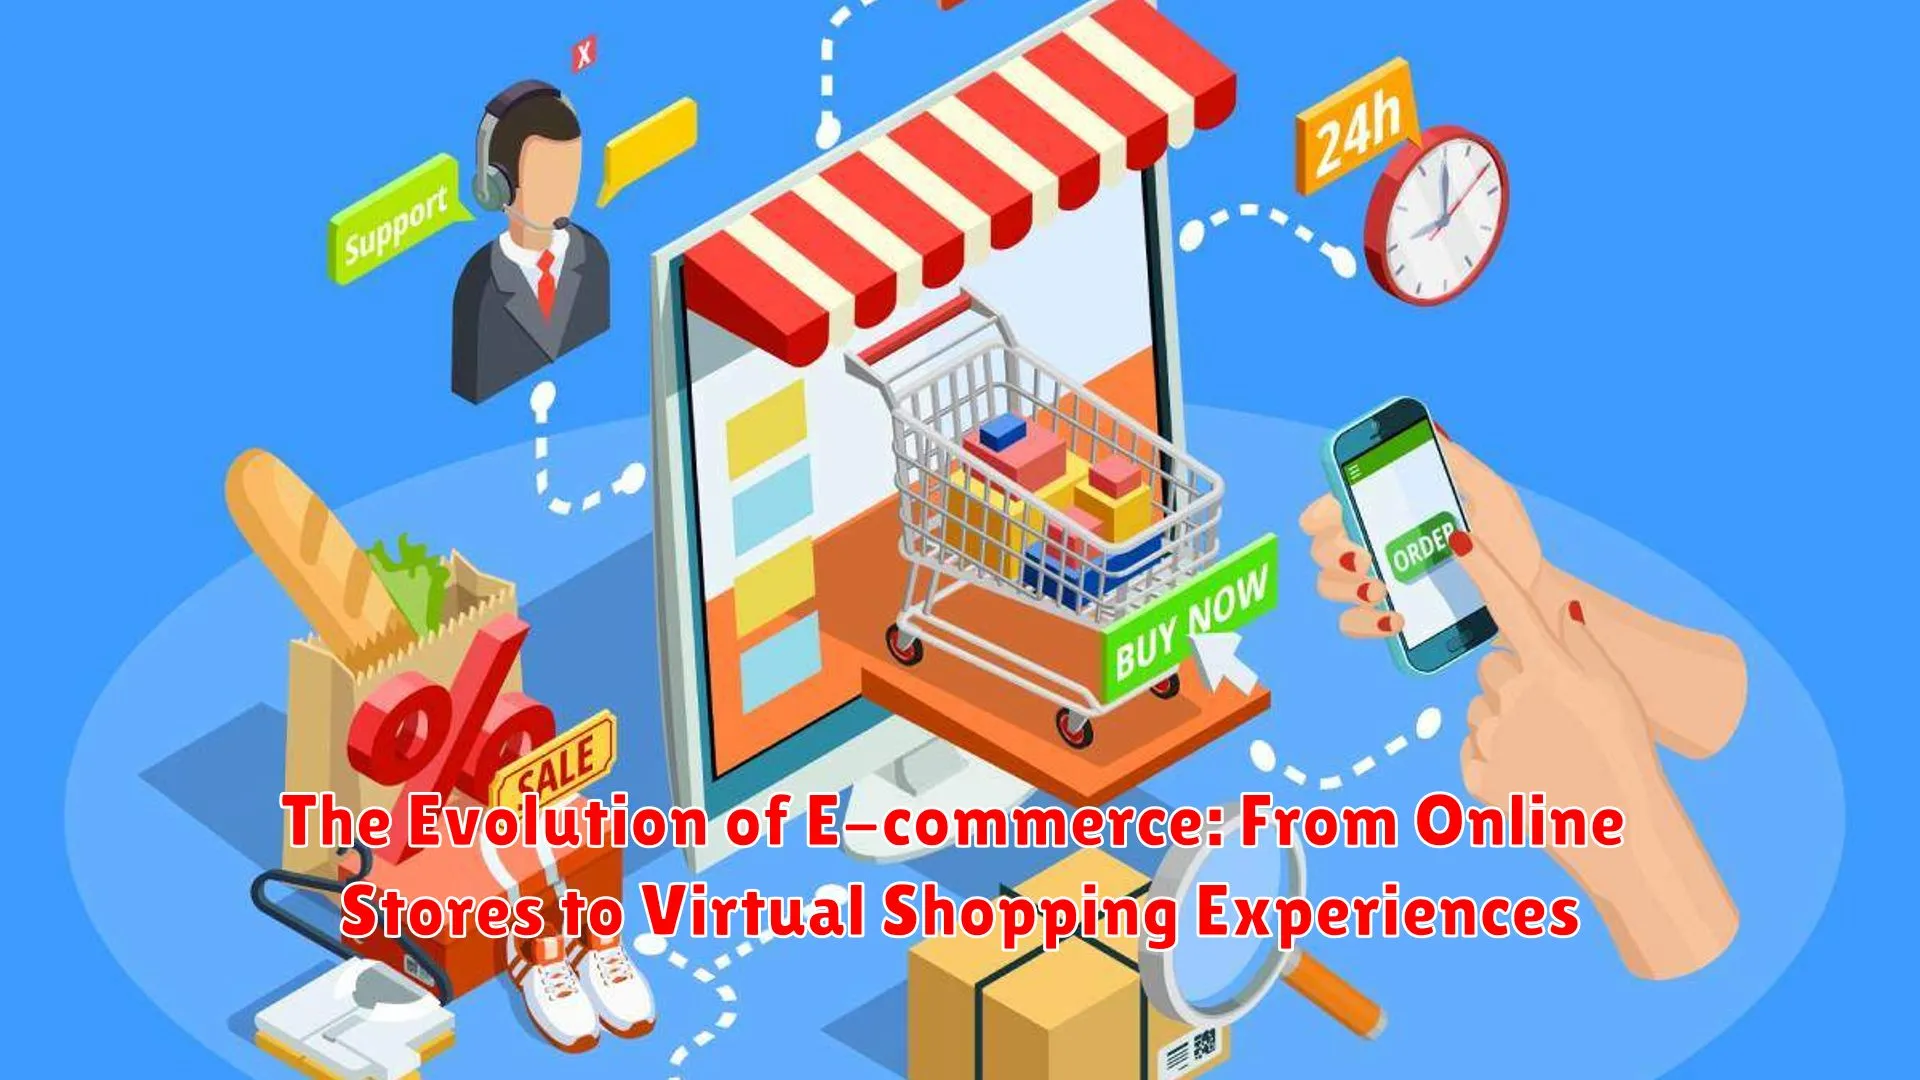 The Evolution of E-commerce: From Online Stores to Virtual Shopping Experiences